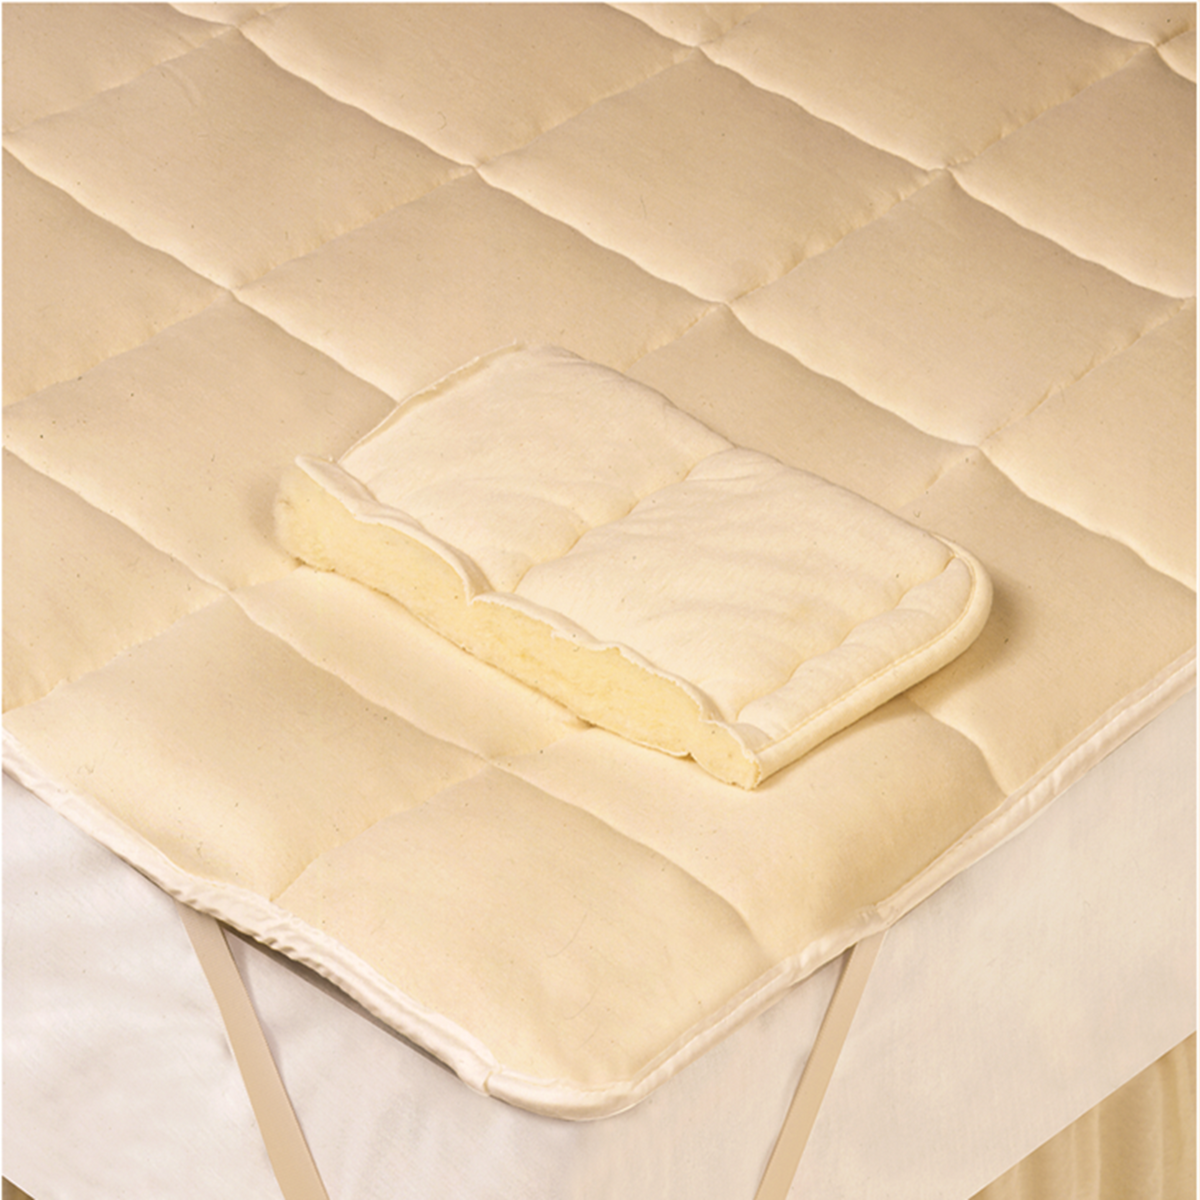 Closeup View of Downtown Company Wool Filled Mattress Pad in Natural Color